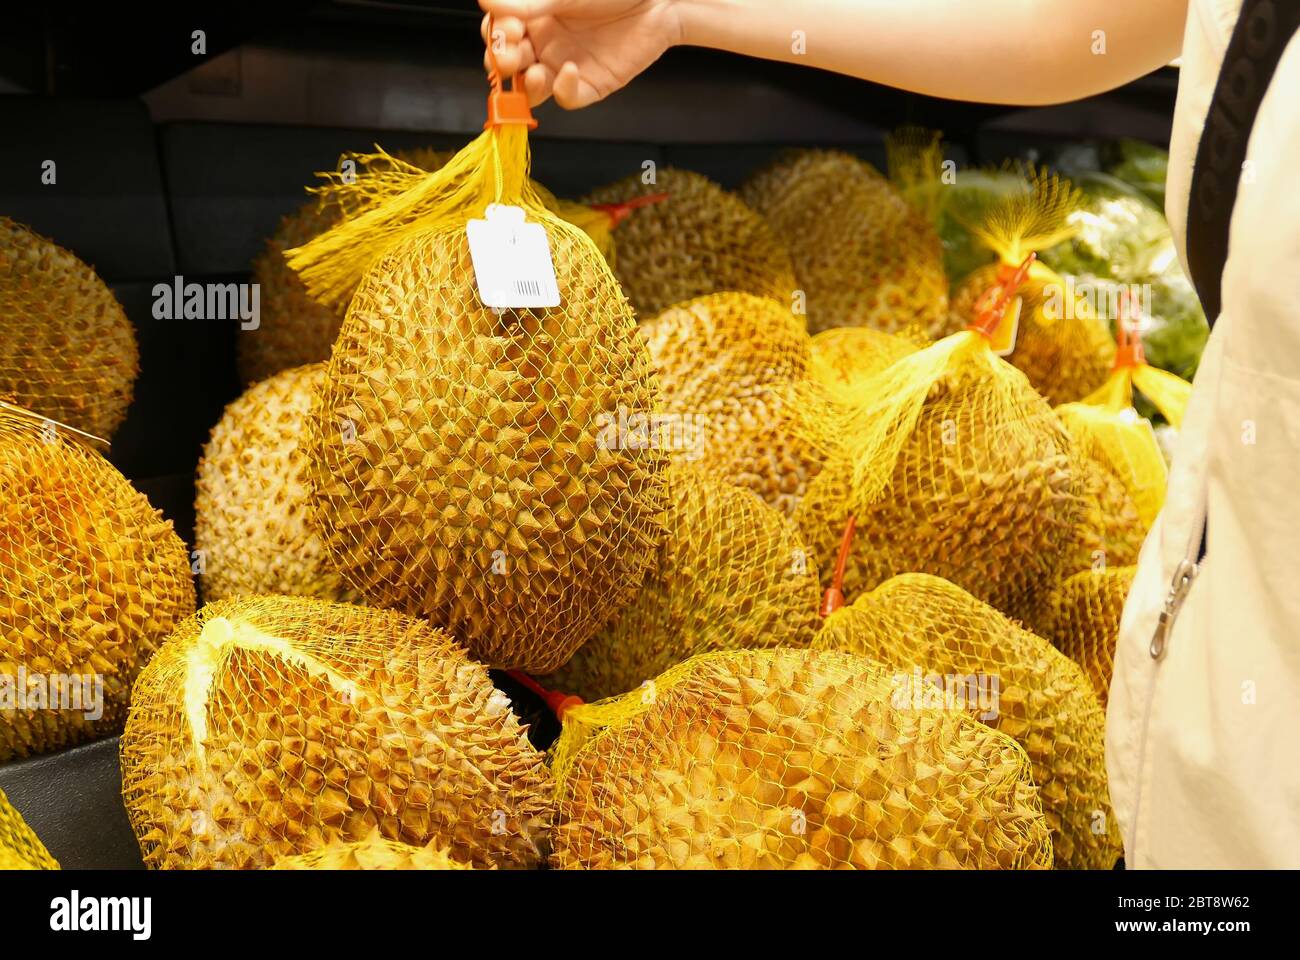 Motion of woman's hand picking durian inside superstore Stock Photo